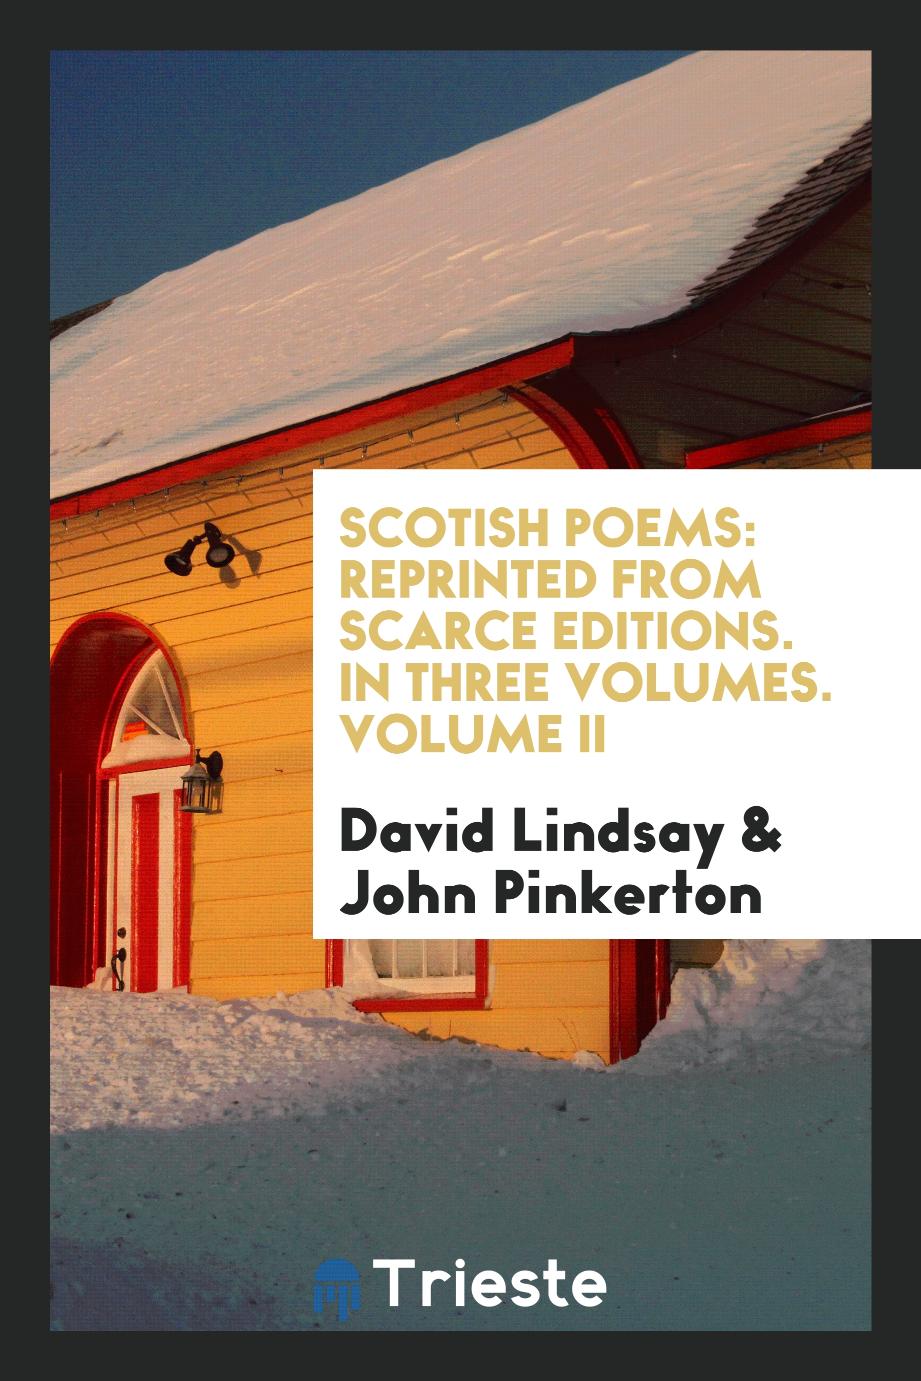 Scotish Poems: Reprinted from Scarce Editions. In Three Volumes. Volume II